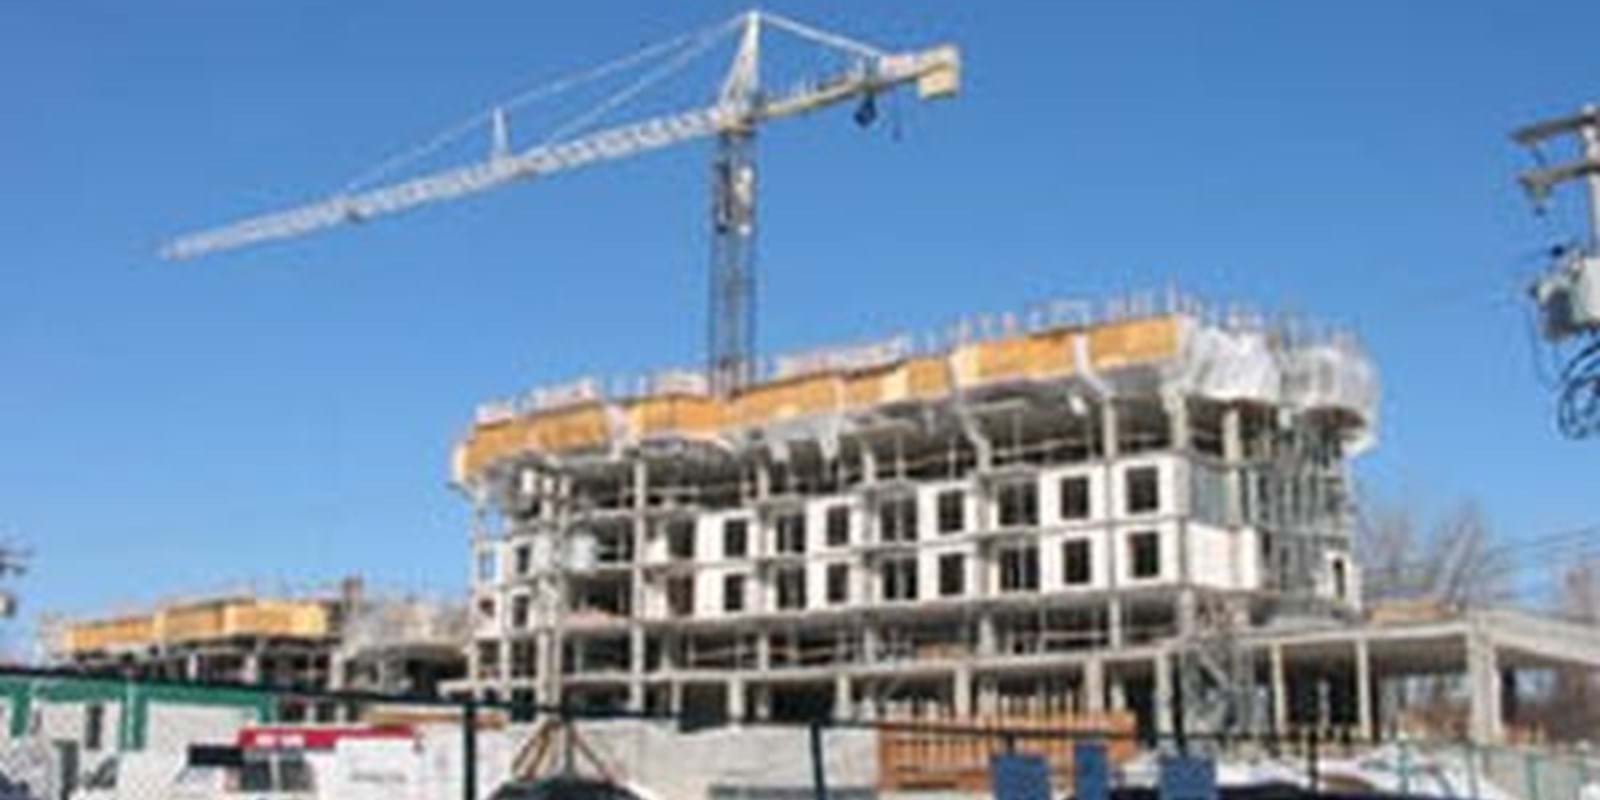 Municipalities issued $4.6 billion in building permits in December